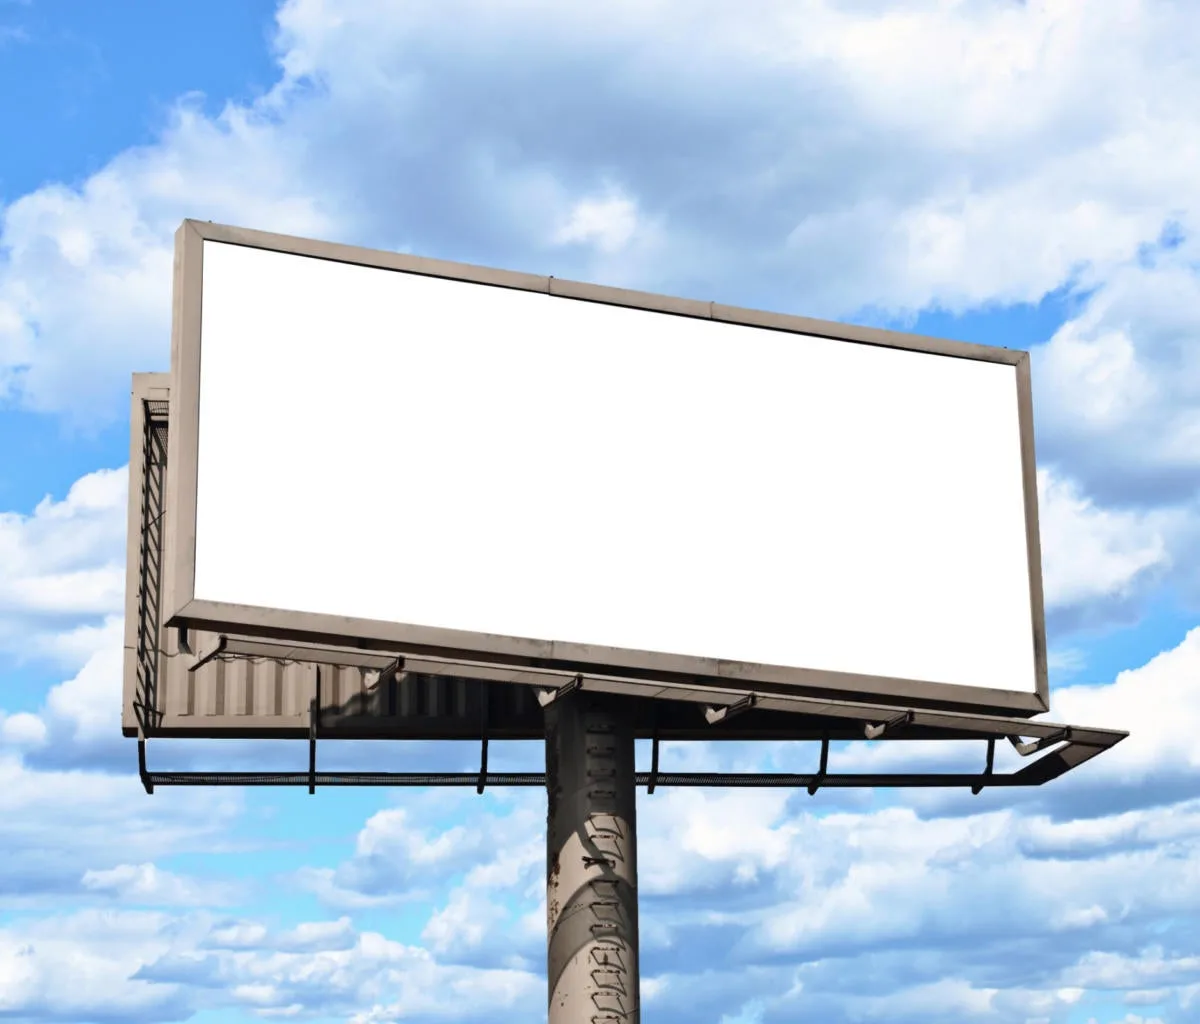 Blank billboard with sky and clouds in the background